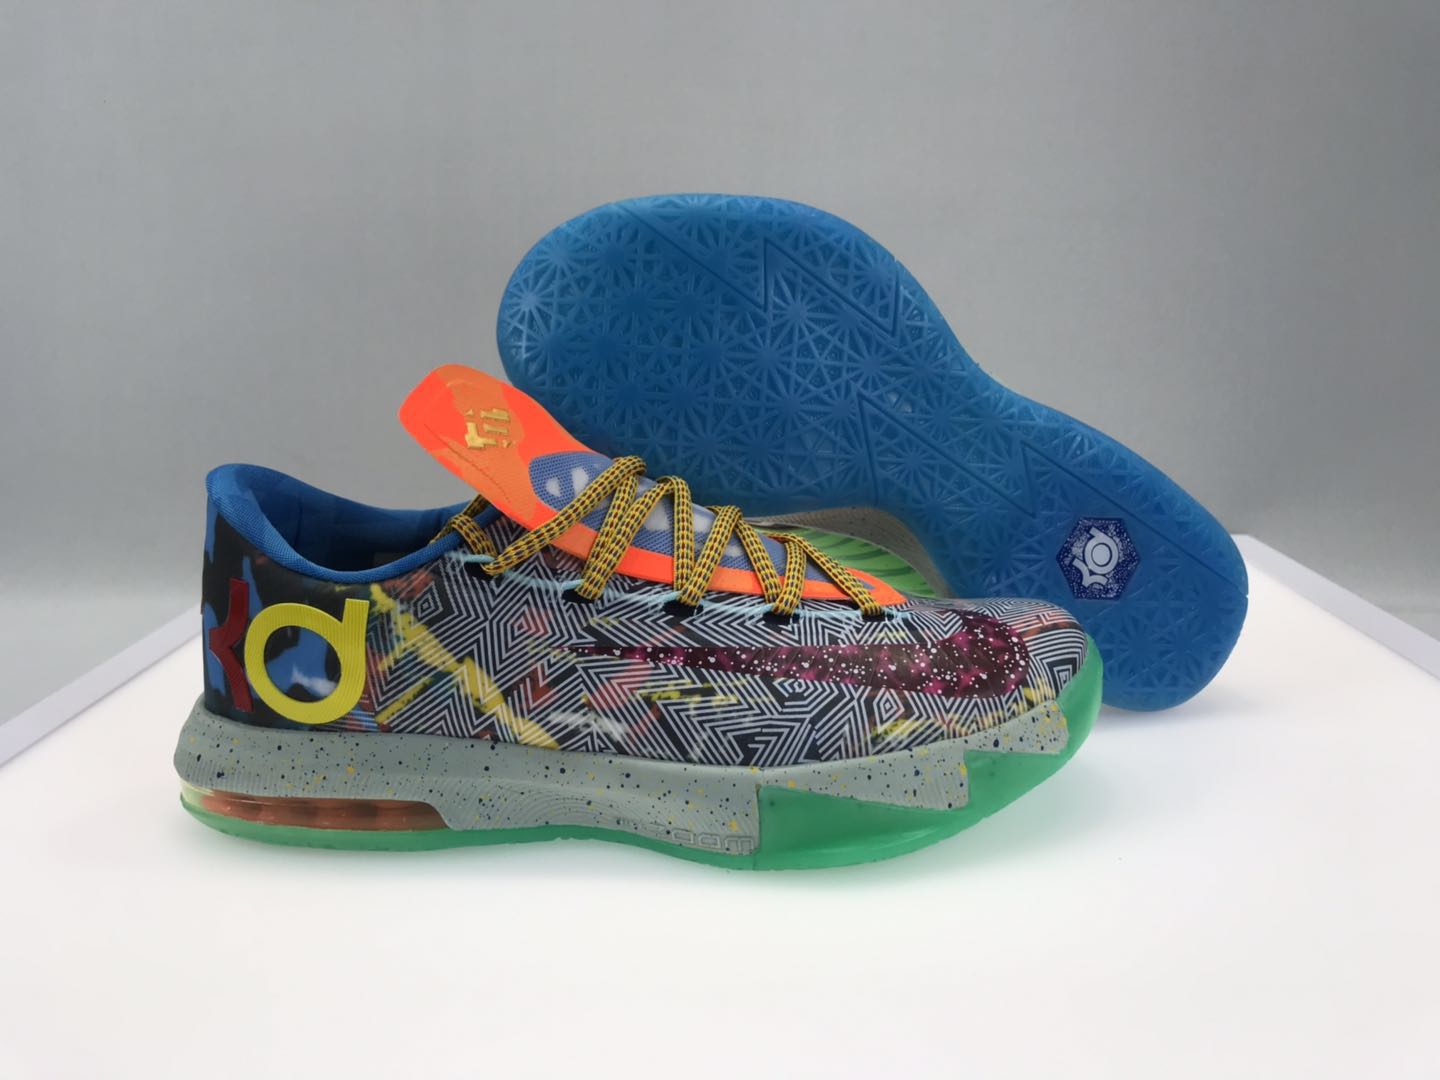 New Men Nike Kevin Durant of What the KD 6 Shoes